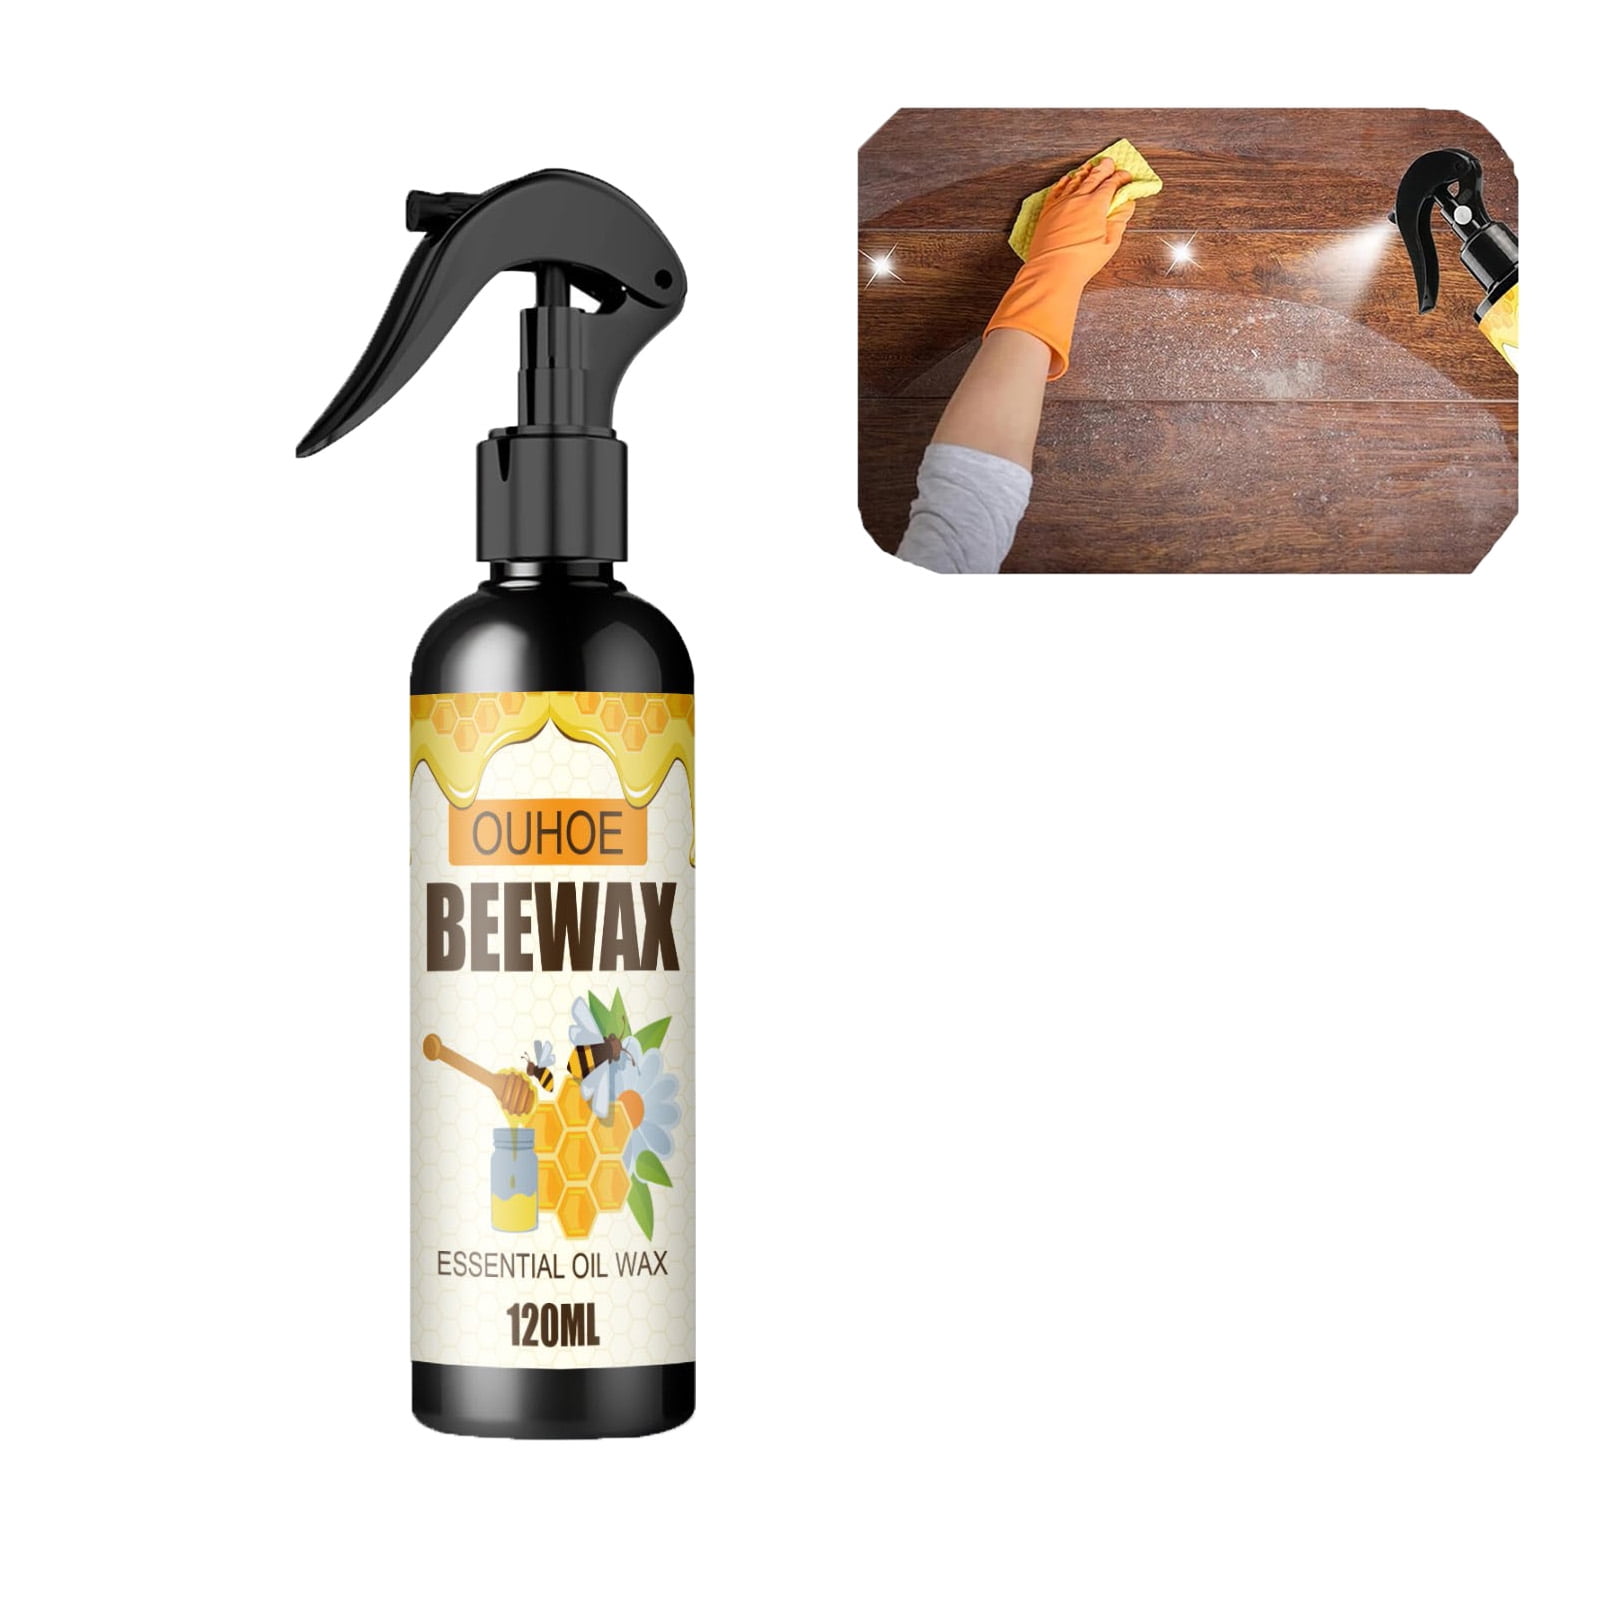  UYUAN Beeswax Spray Furniture Polish Spray, Natural Micro-Molecularized  Beeswax Spray Cleaner with Sponge & Towel for Wood Furniture, Restores  Shine and Protects Surfaces : Health & Household